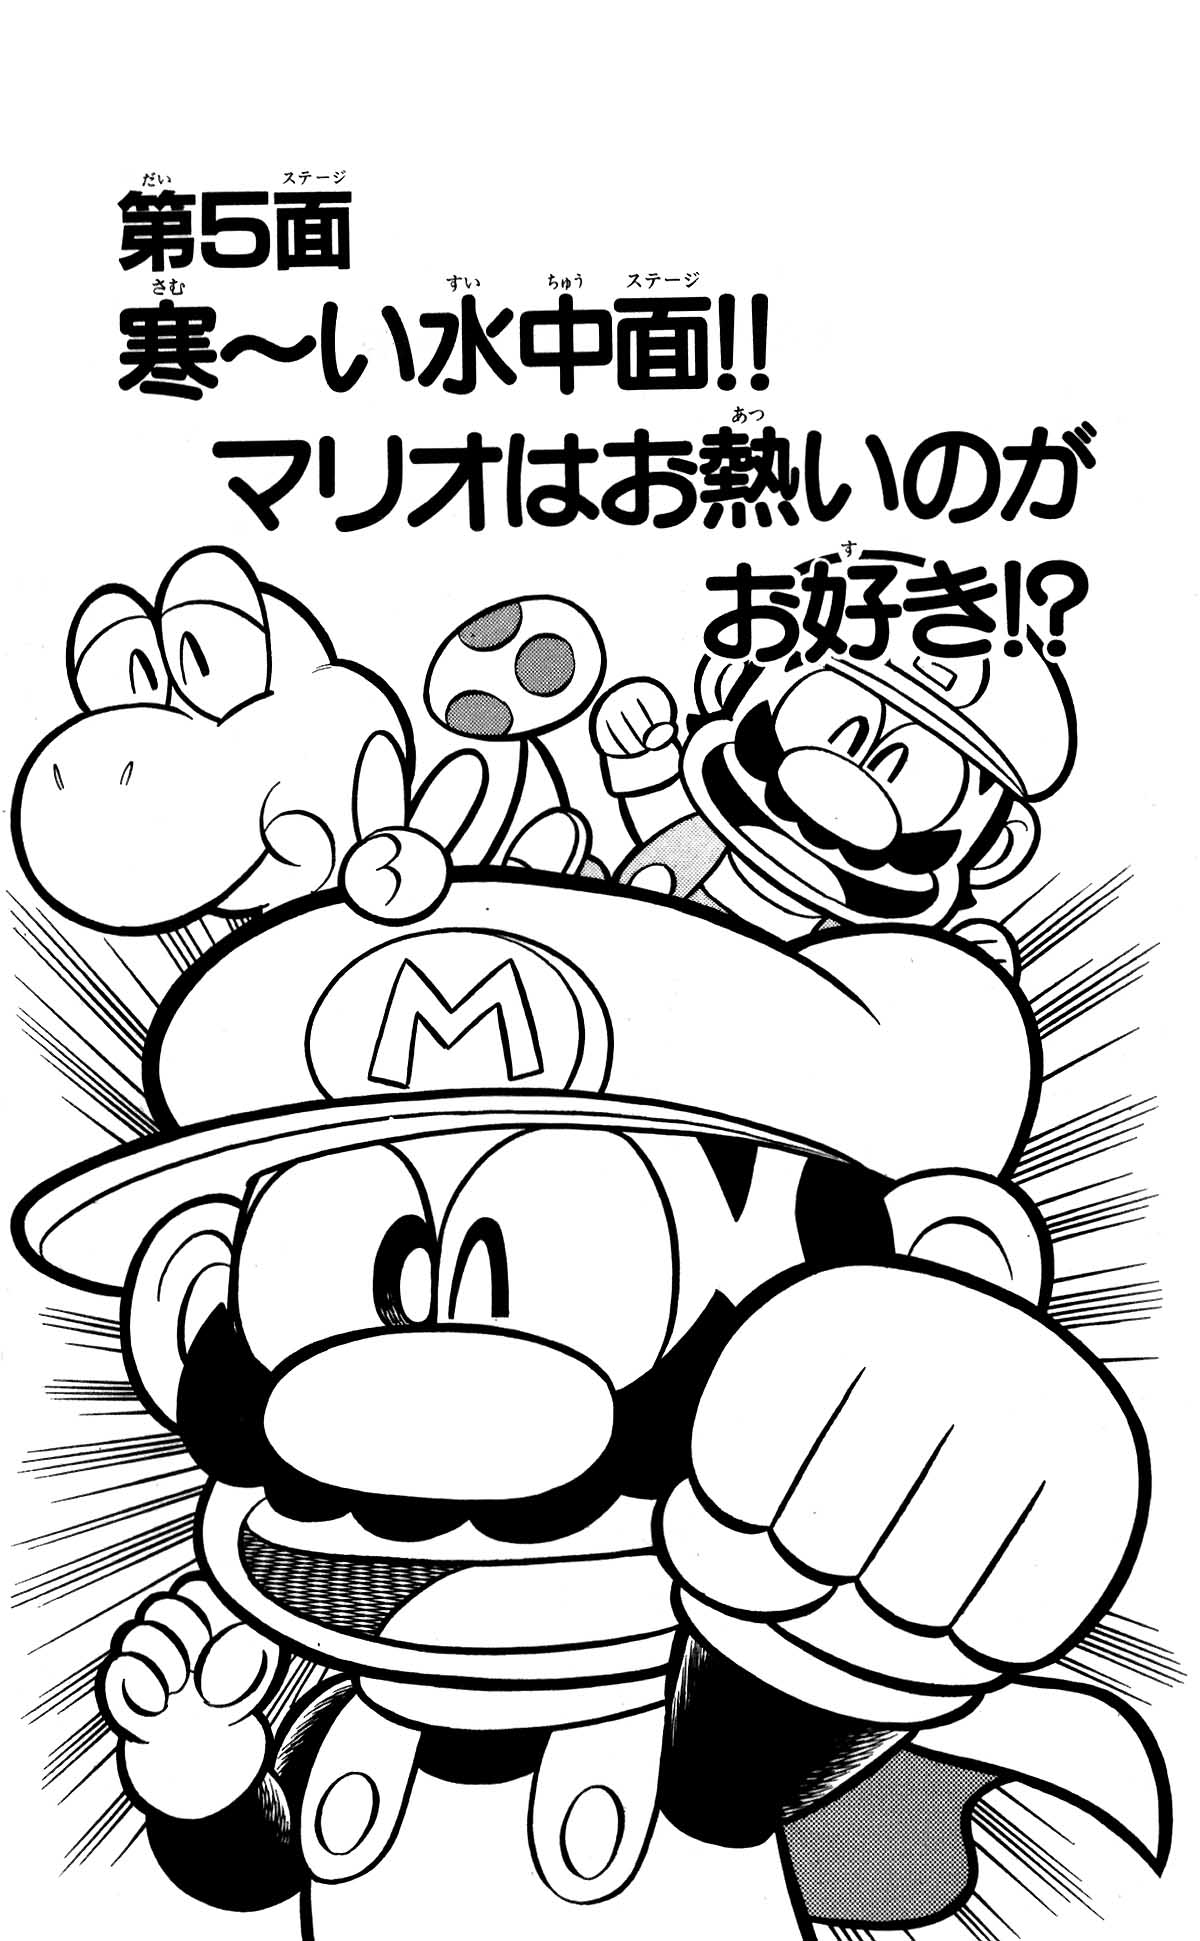 Super Mario-Kun Vol.1 Chapter 5: Cold Underwater Stage!! Does Mario Like Warmer Places!? - Picture 1